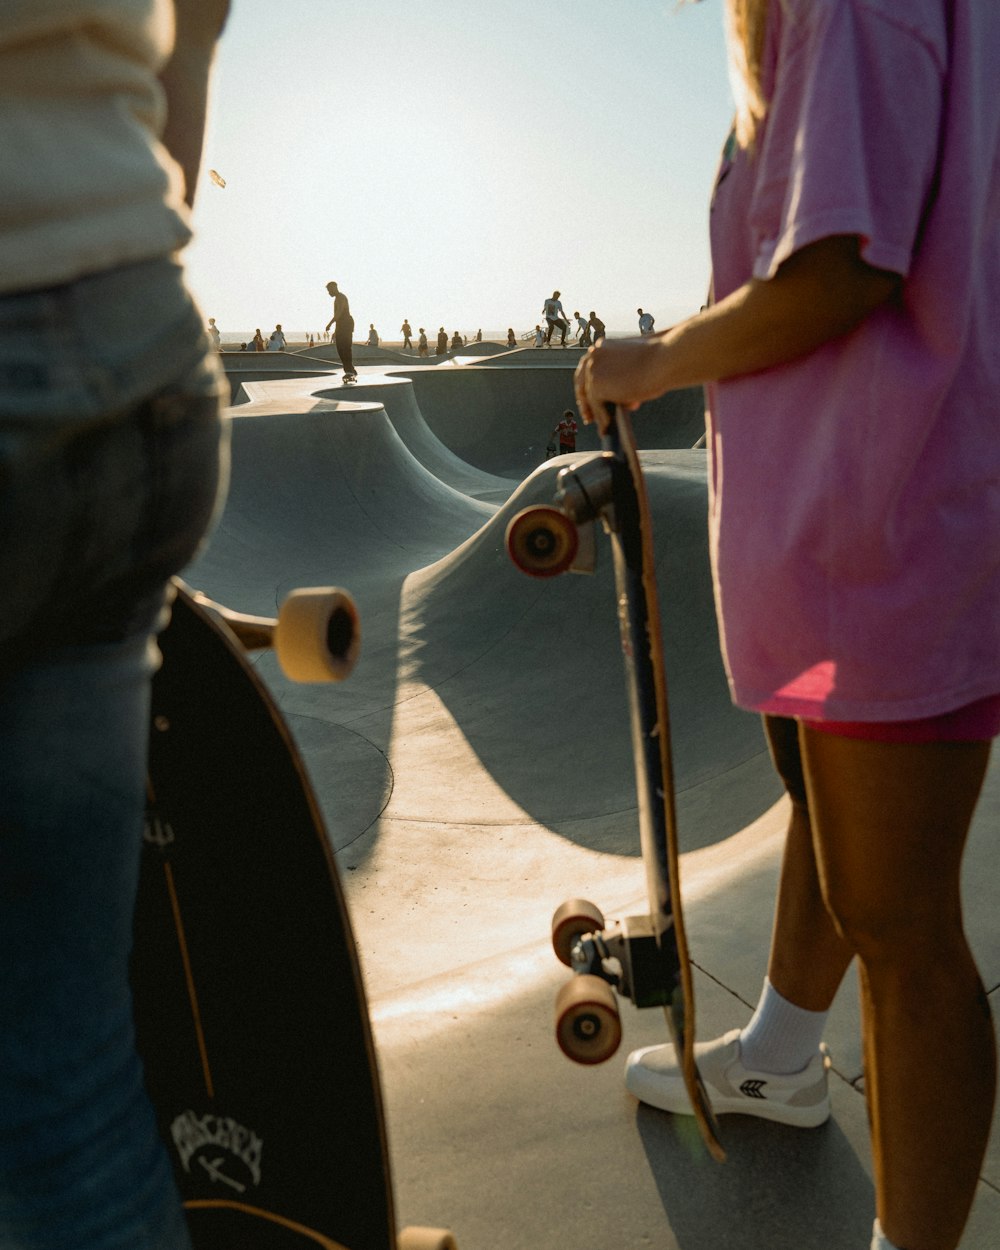 a girl in a pink dress is holding a skateboard